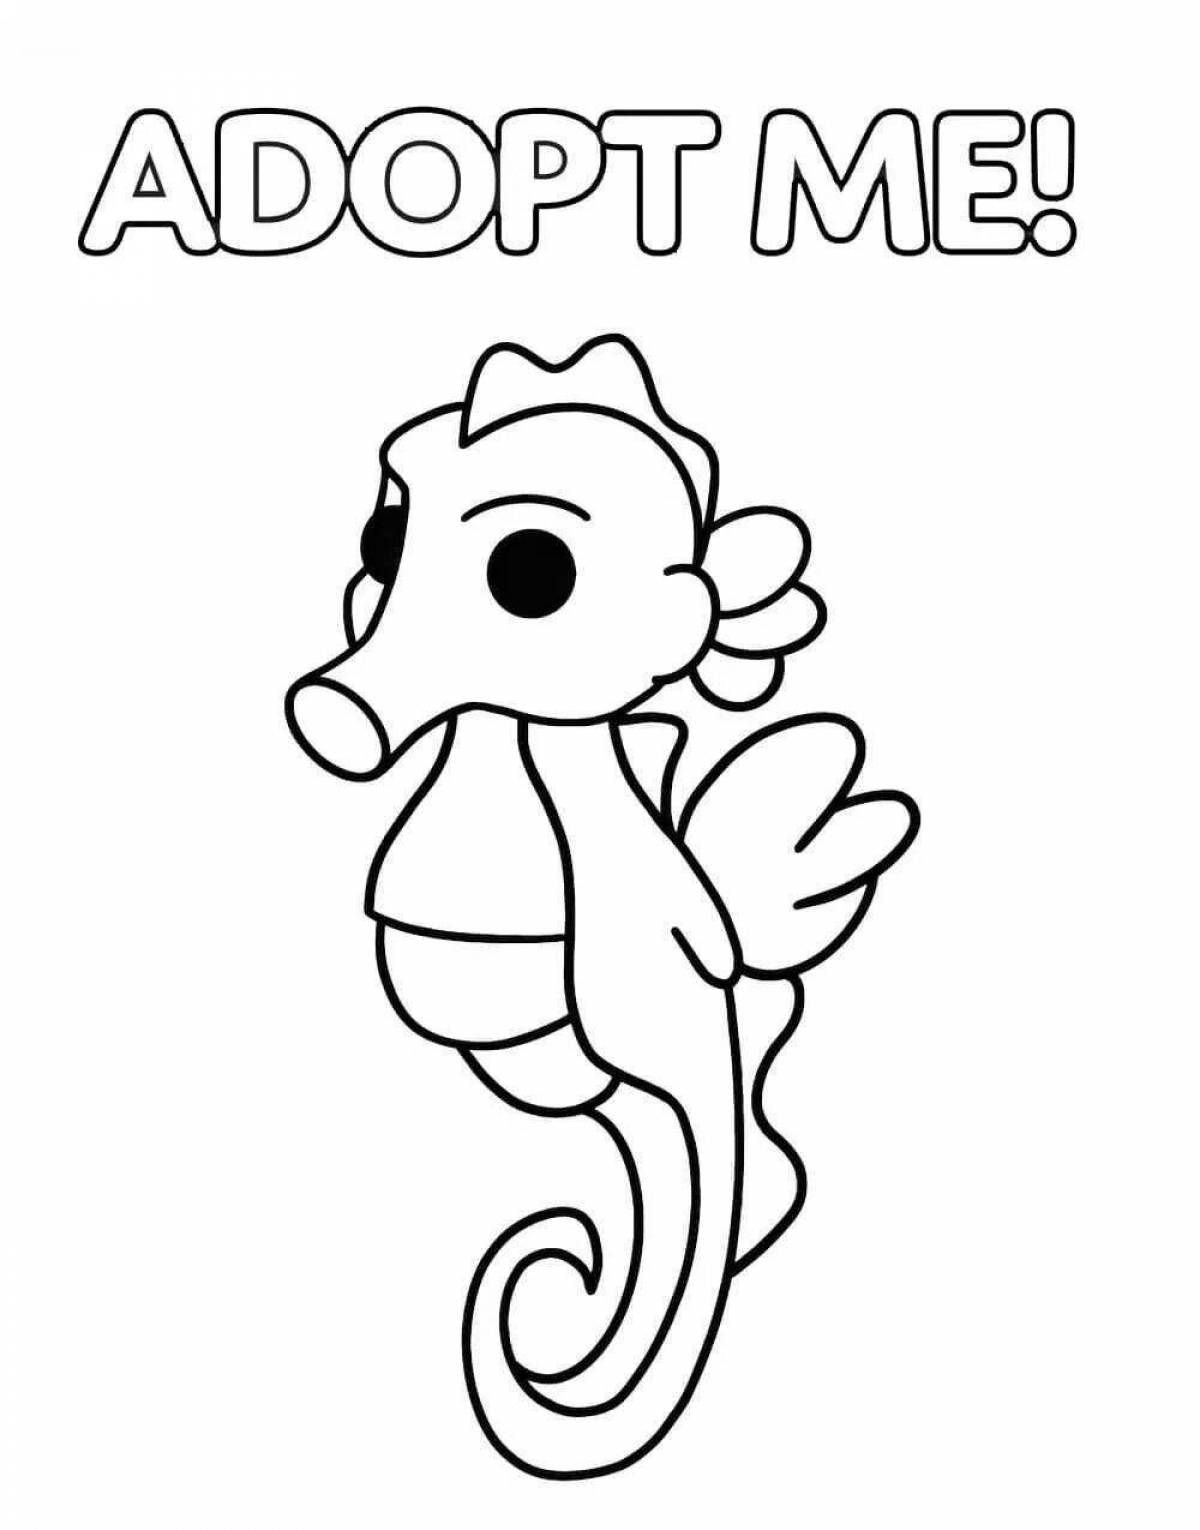 Naughty pet coloring pages from adopt me